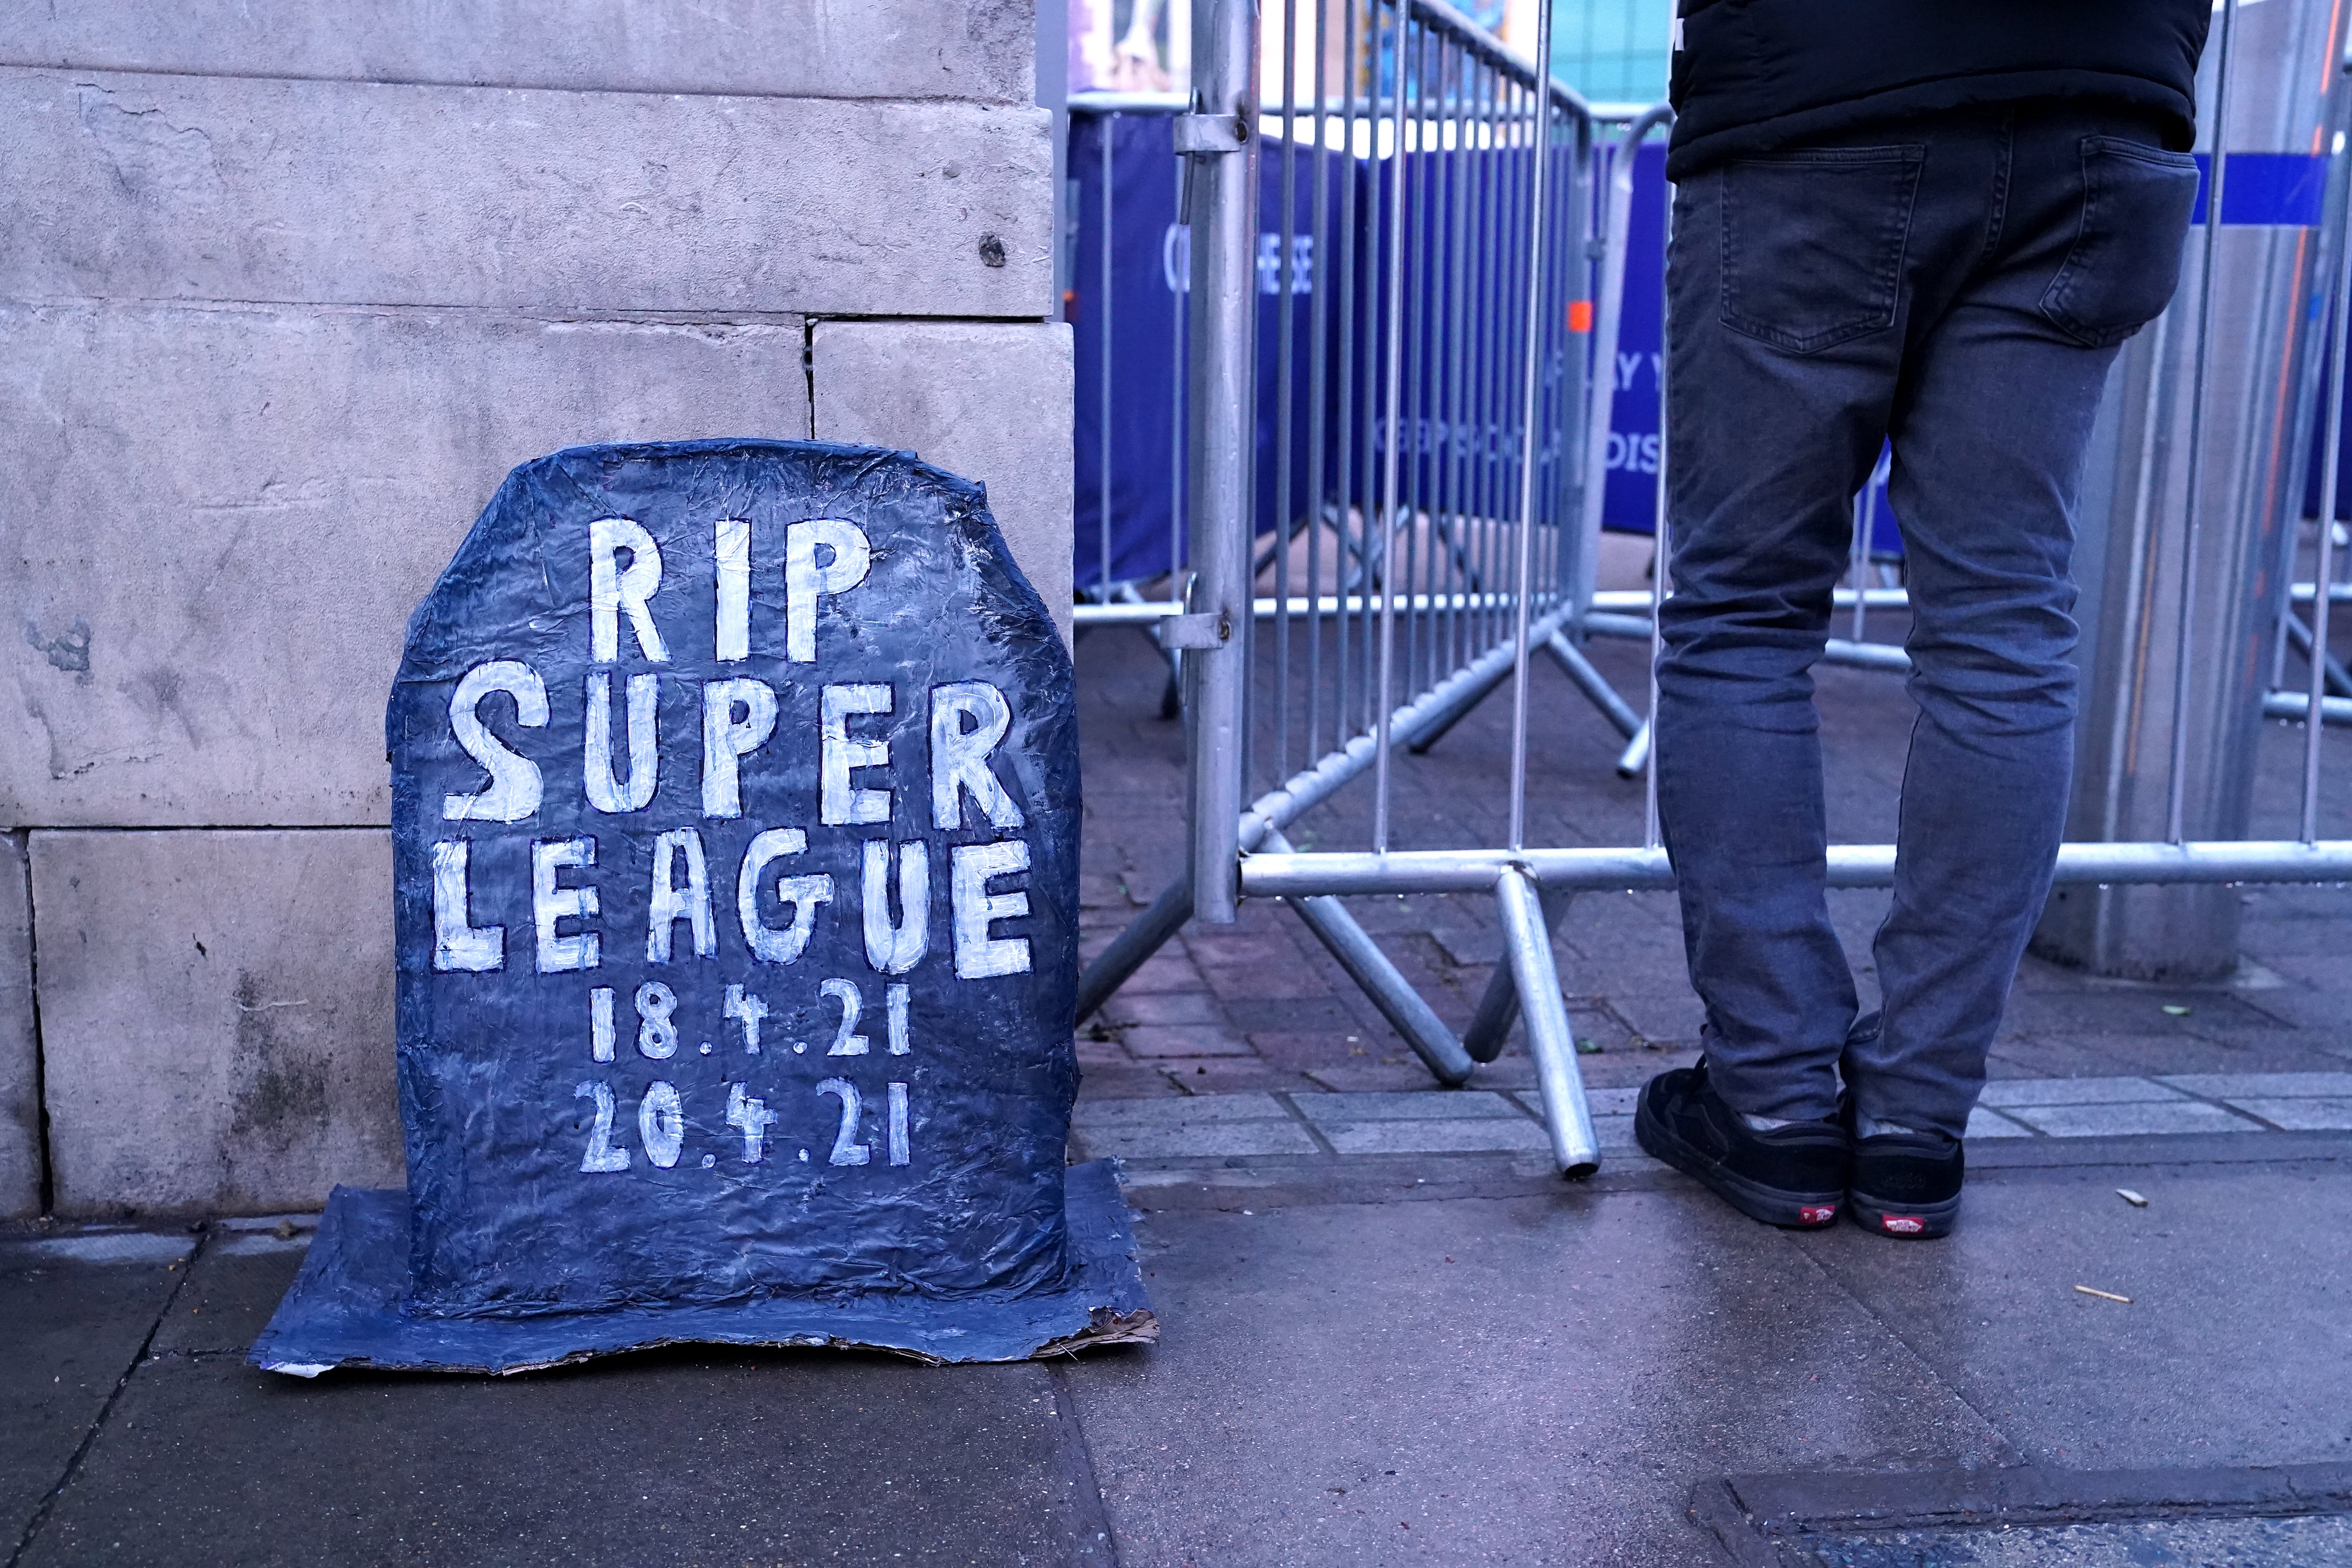 The Super League was launched in April but quickly collapsed amid fan outrage (Steve Parsons/PA)